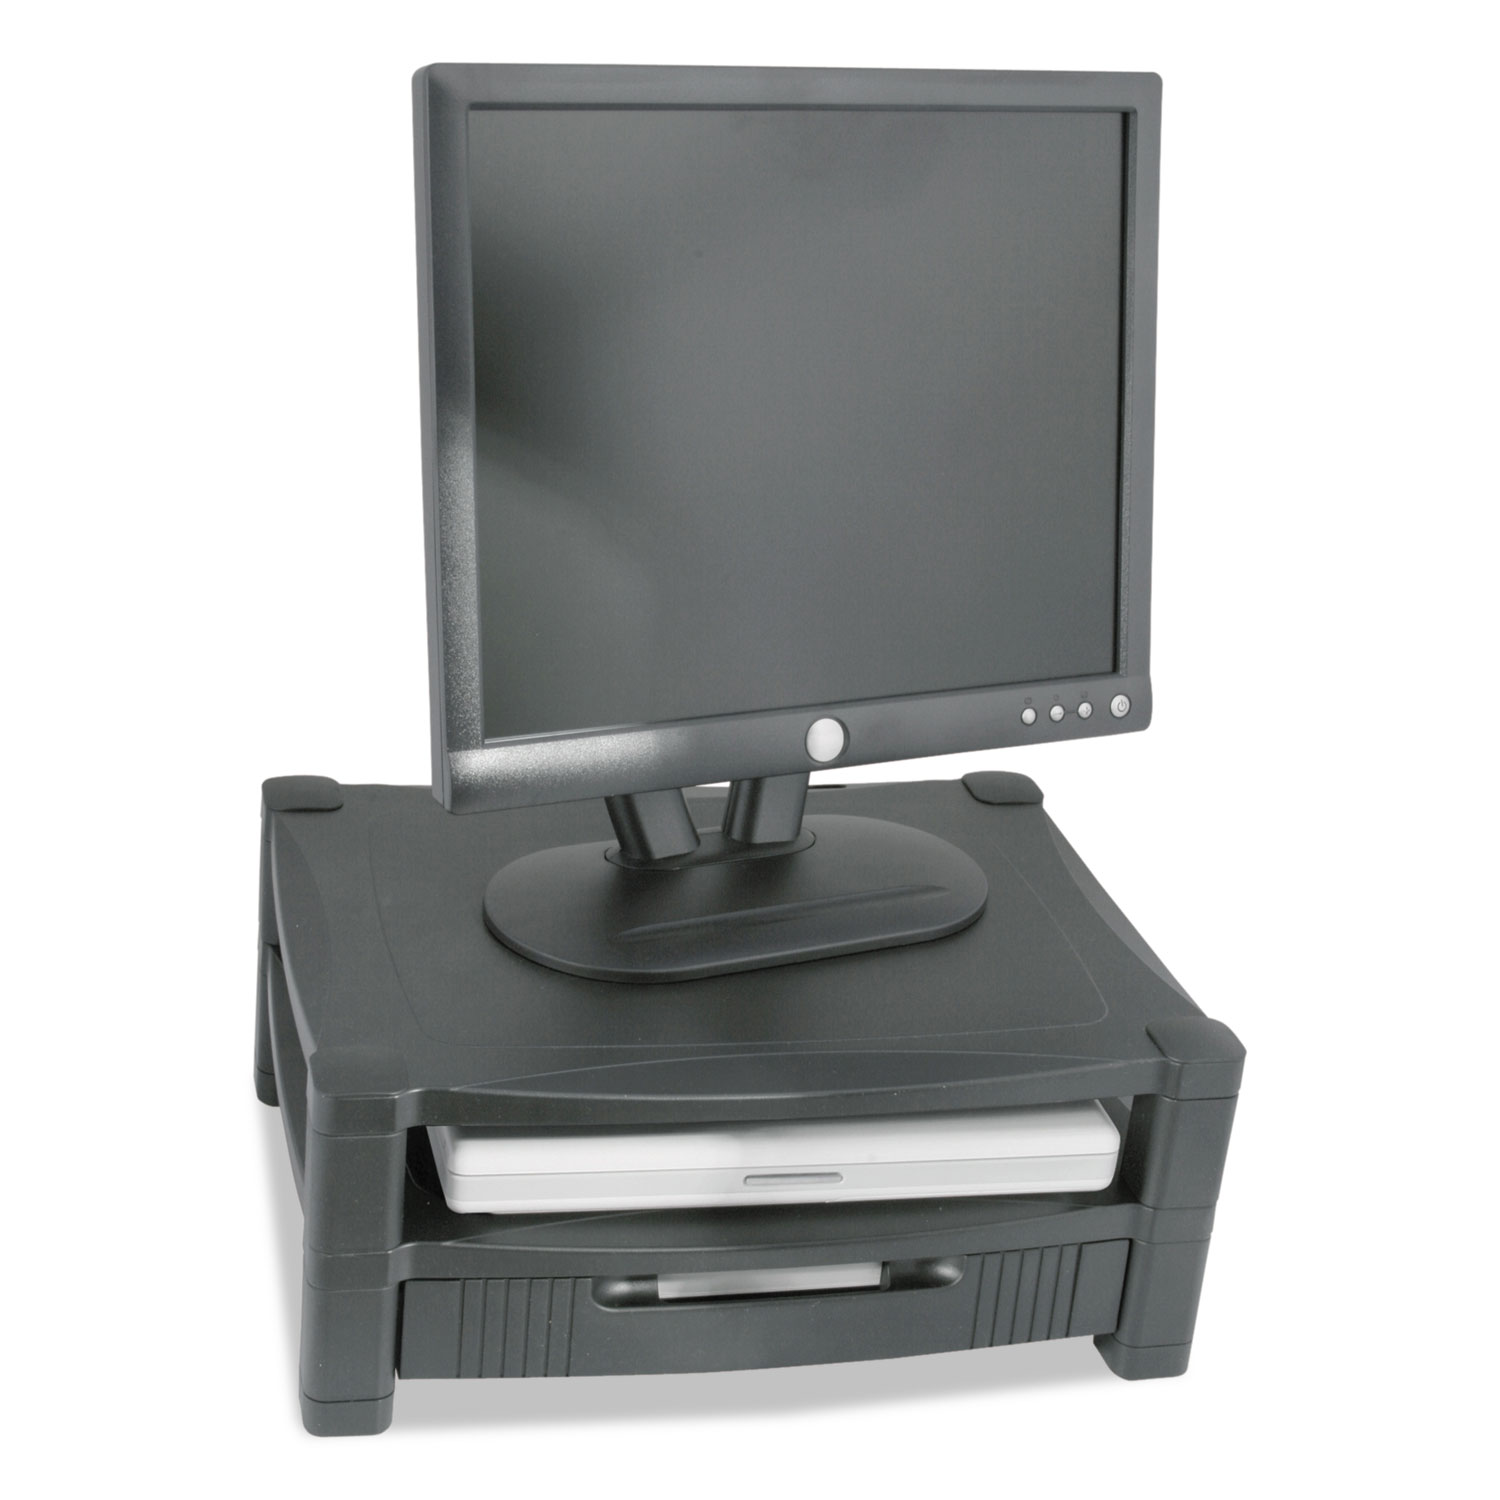  Kantek MS480 Two Level Stand, Removable Drawer, 17 x 13 1/4 x 3-1/2 to 7, Black (KTKMS480) 